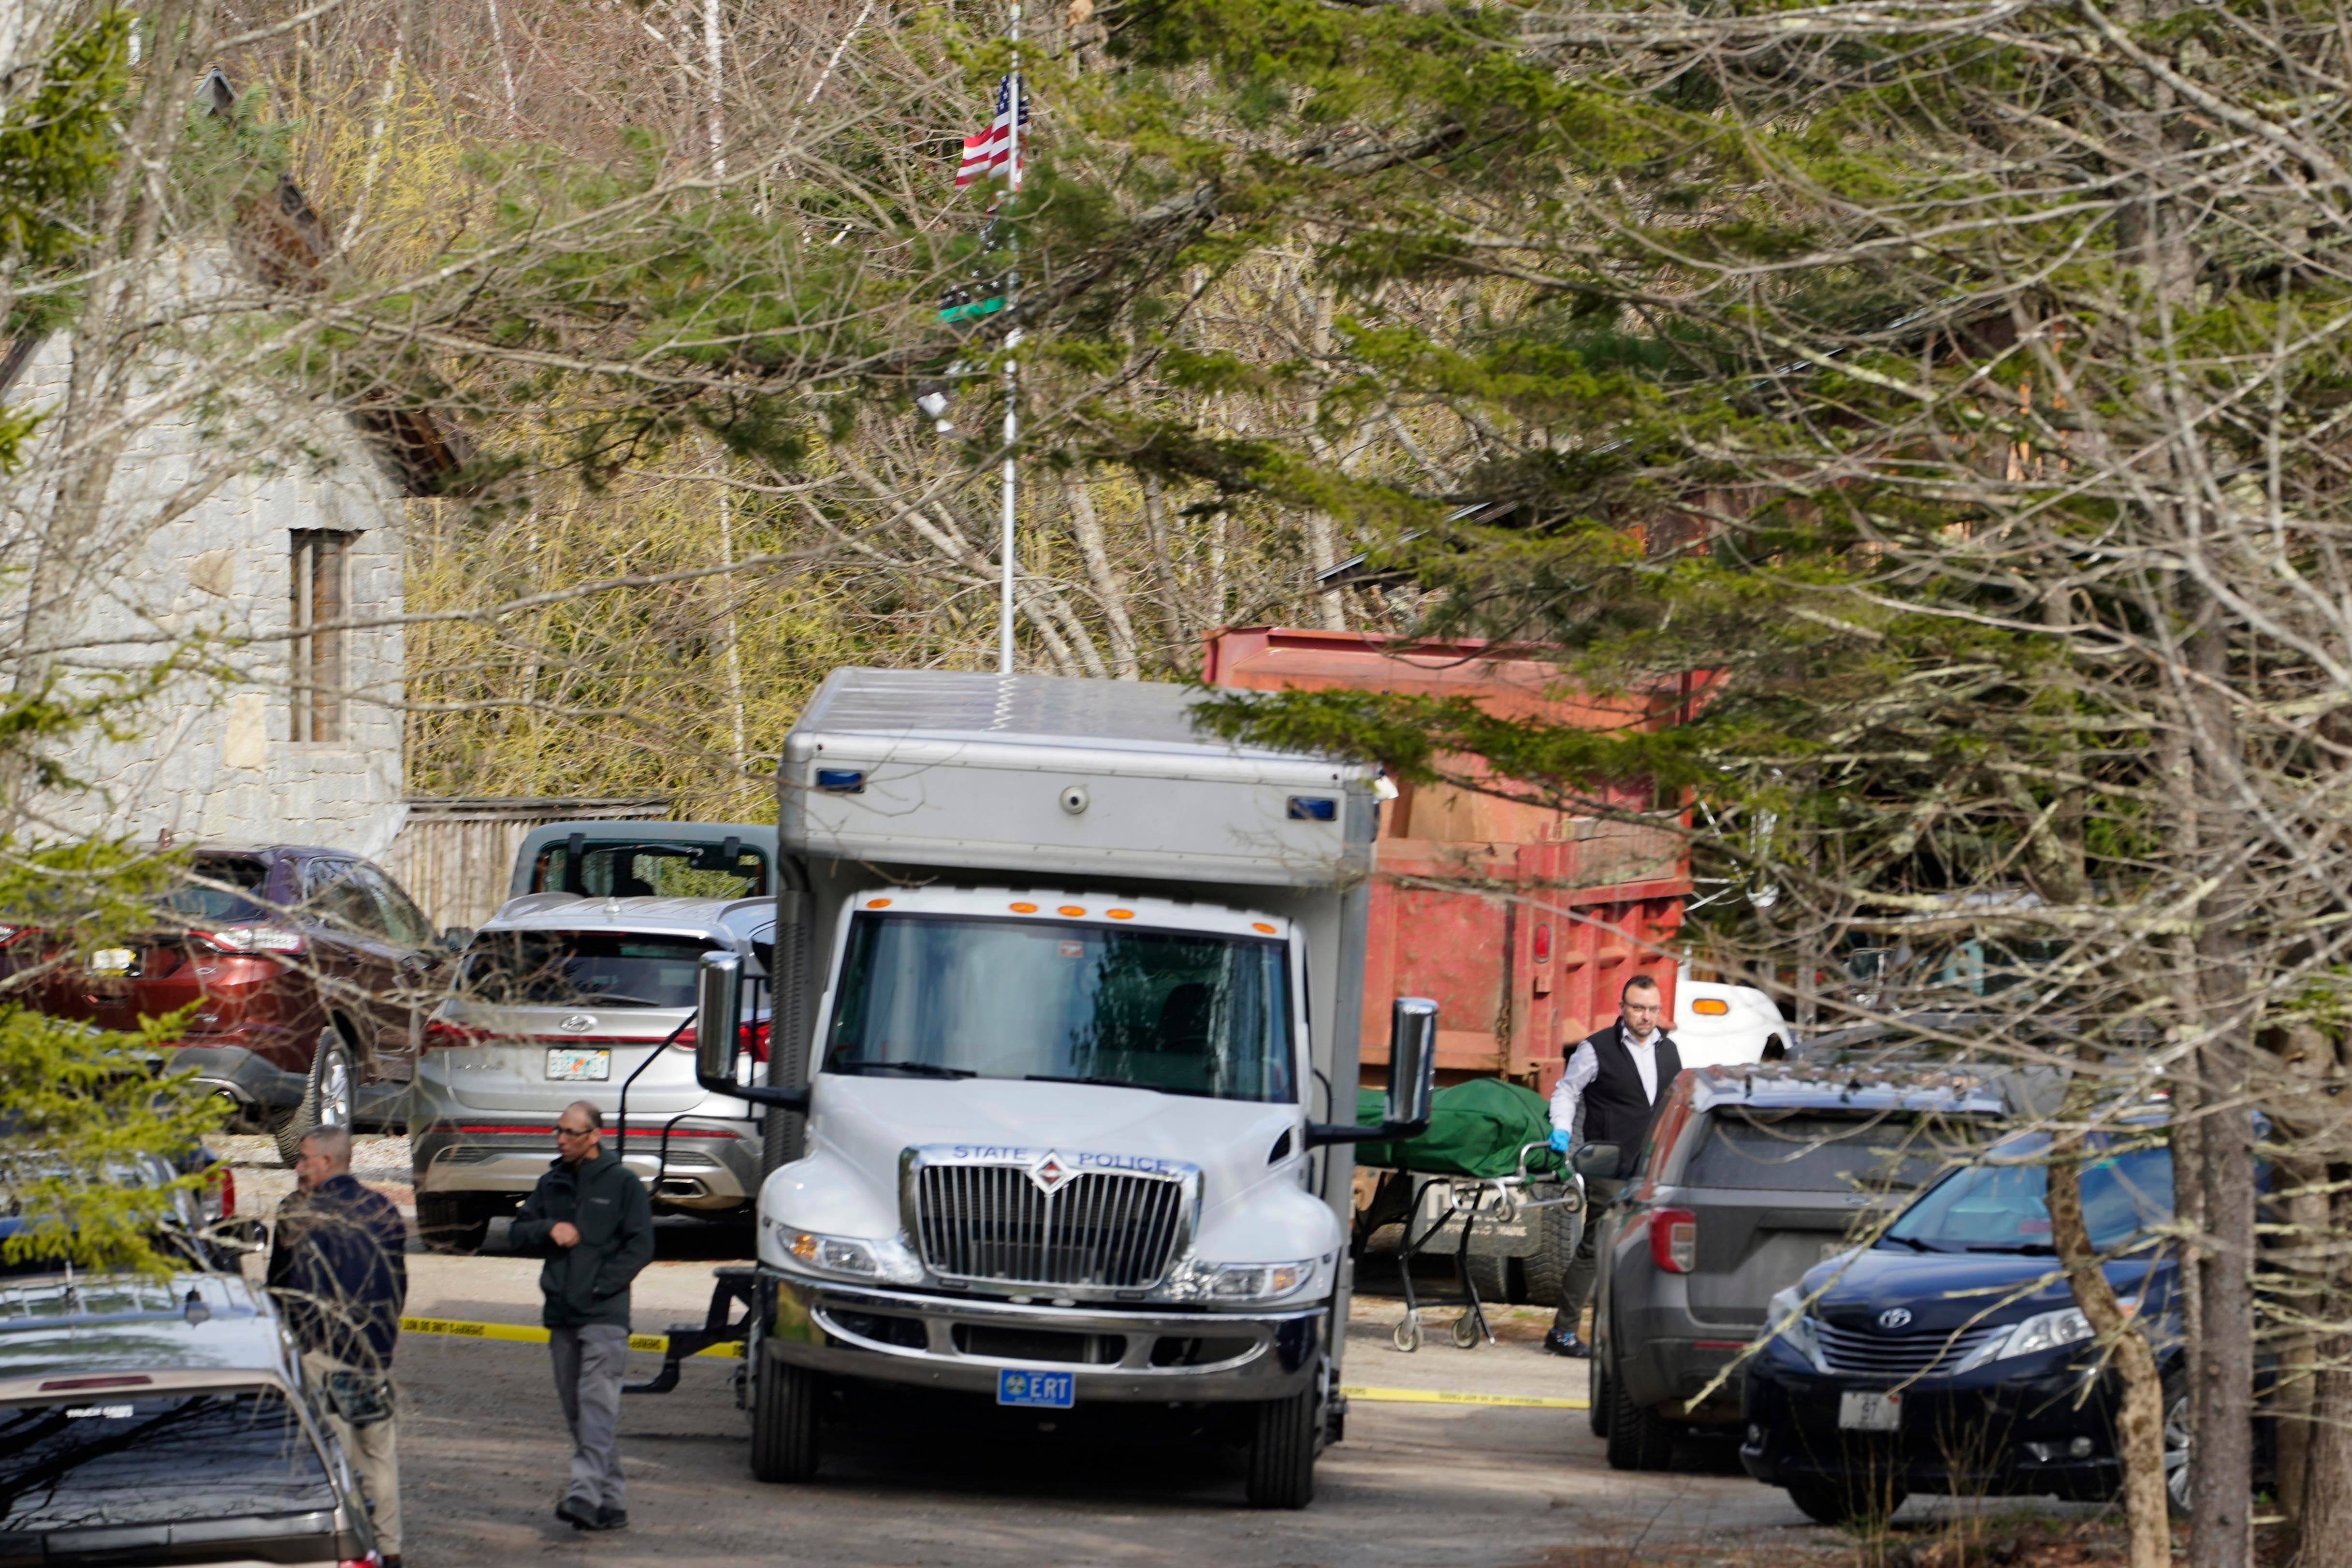 A body is wheeled to a hearse at the scene of a shooting in Bowdoin, Maine